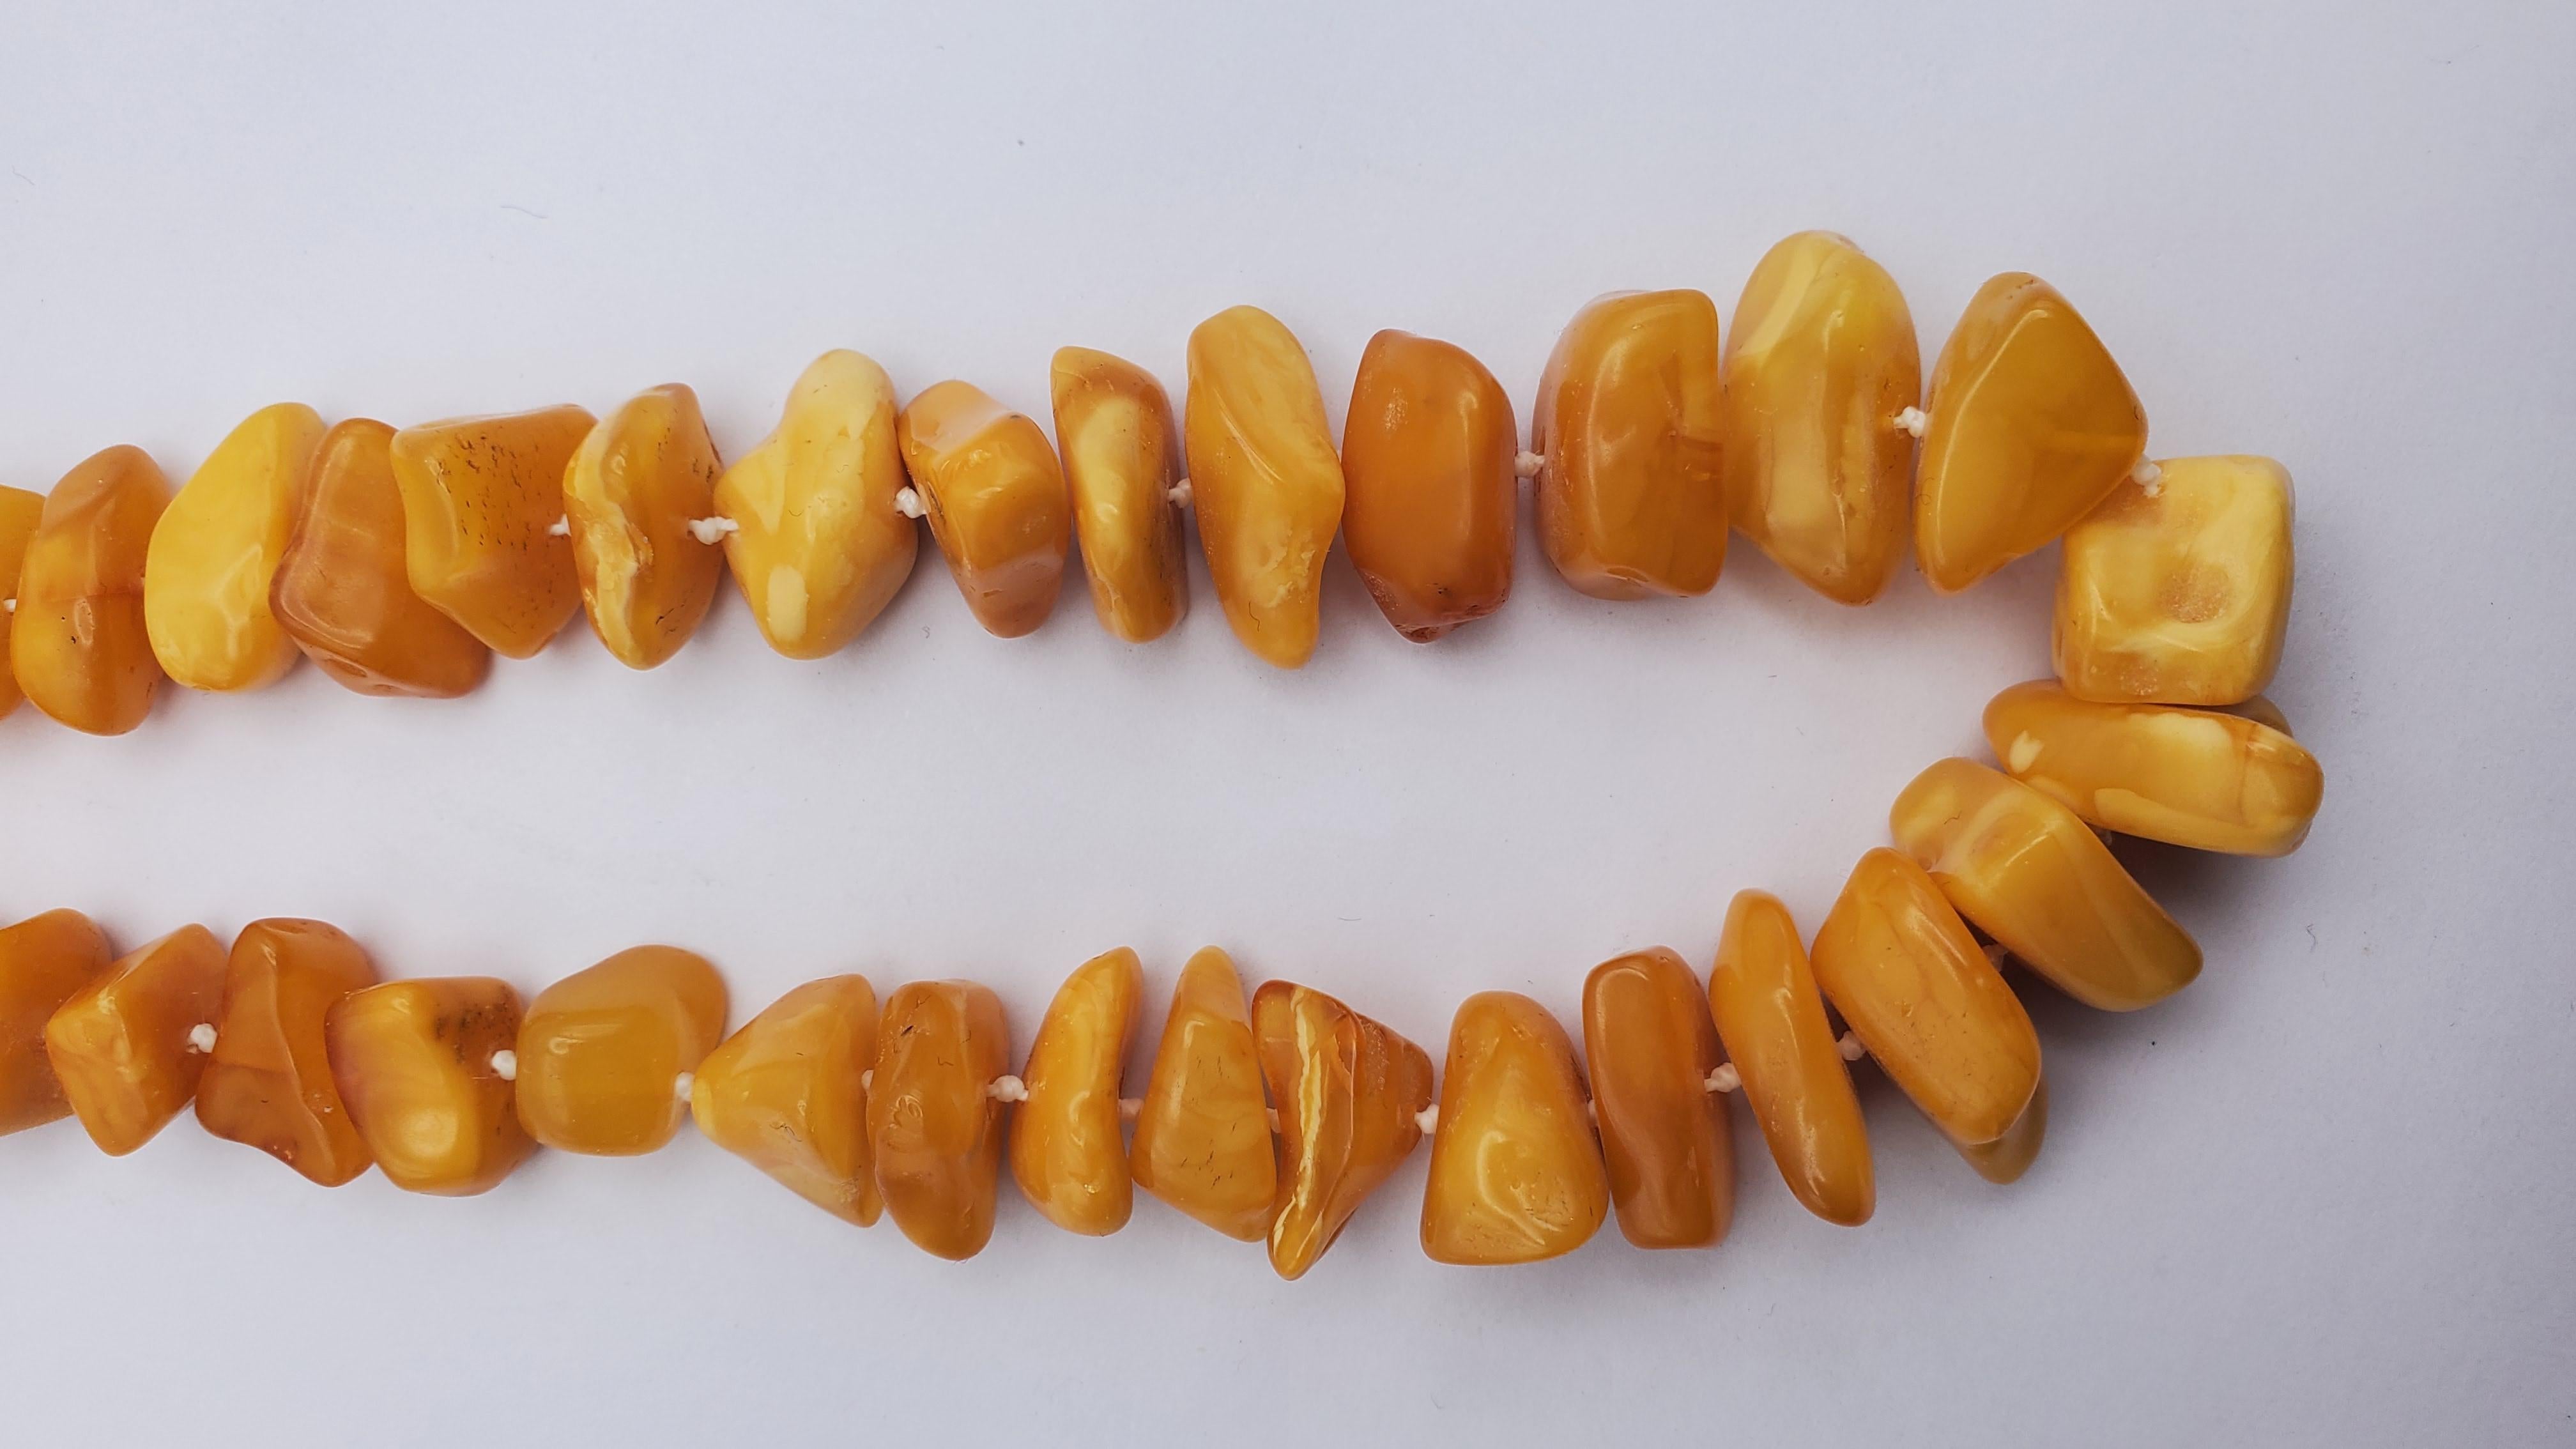 Gorgeous vintage Egg Yolk Baltic Amber bead necklace from the 1930s. The opaque warm golden colored beads are strung continuously with knots in a graduated design. The strand is 28 inches long to comfortably fit over the head. There are some natural